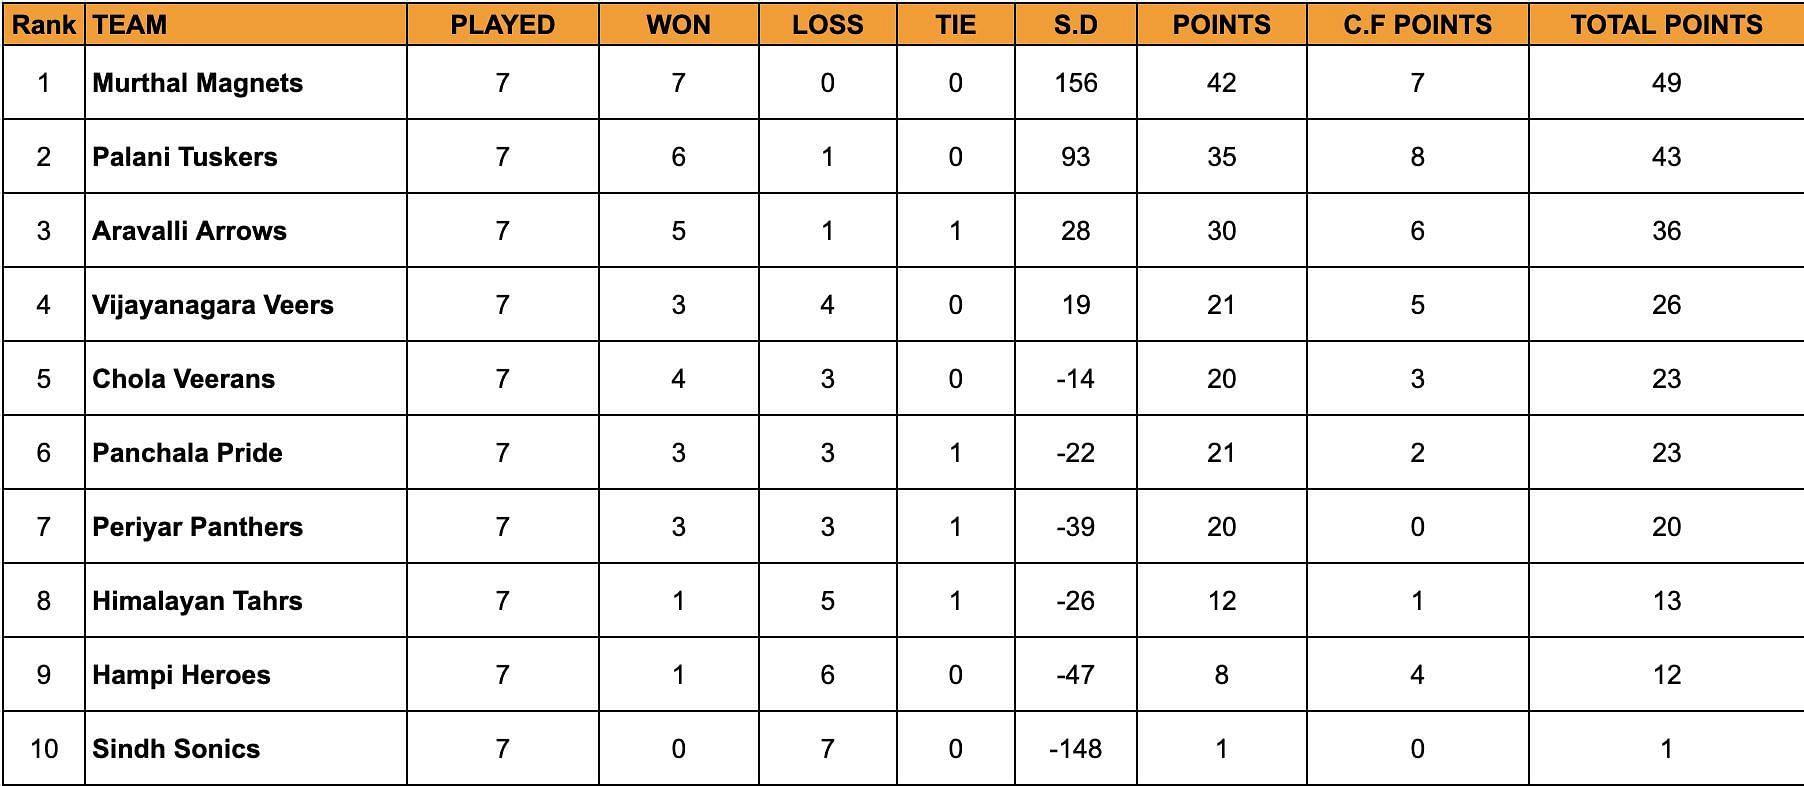 YKS standings after Day 7 of Challenger Round.